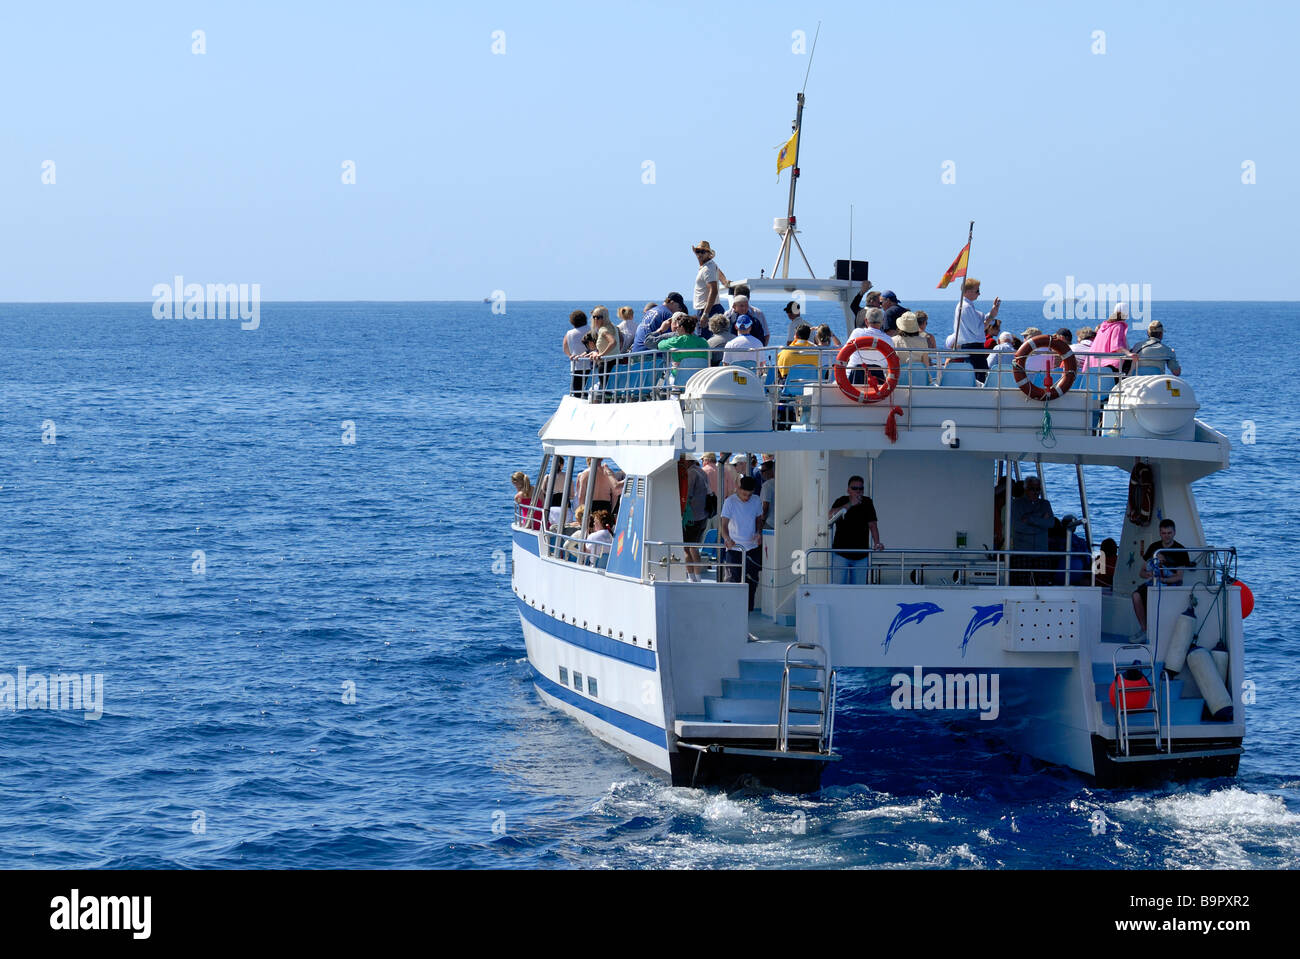 The exciment among the tourists on the dolphin search boat. Puerto Rico, Gran Canaria, Canary Islands, Spain, Europe. Stock Photo